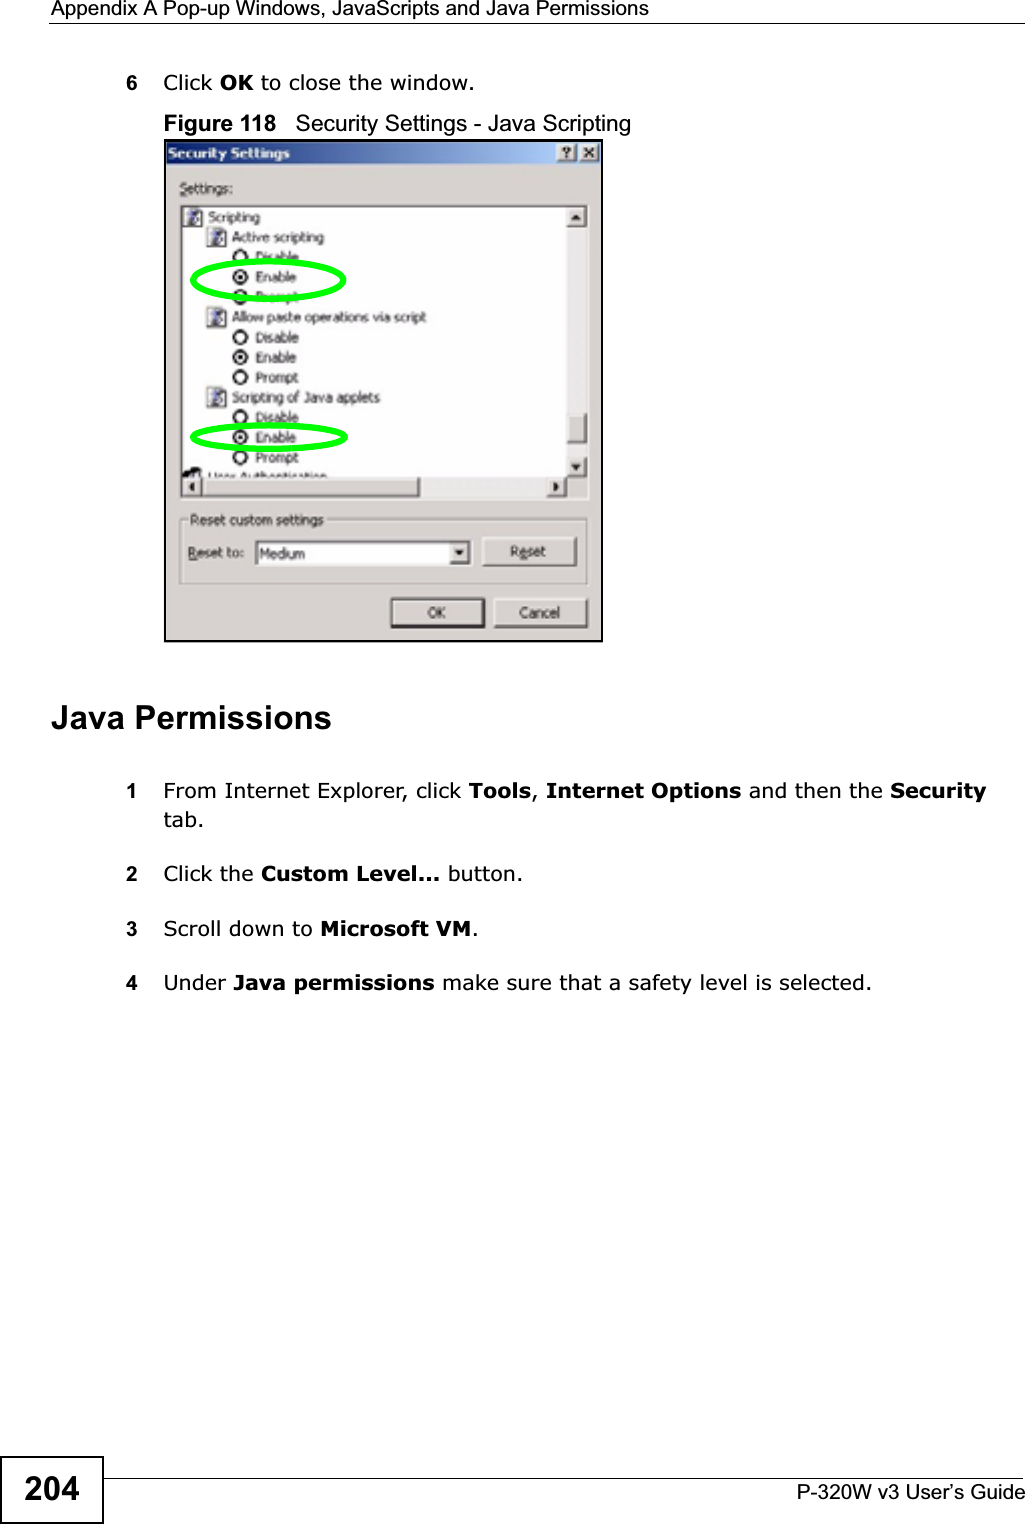 Appendix A Pop-up Windows, JavaScripts and Java PermissionsP-320W v3 User’s Guide2046Click OK to close the window.Figure 118   Security Settings - Java ScriptingJava Permissions1From Internet Explorer, click Tools,Internet Options and then the Securitytab. 2Click the Custom Level... button. 3Scroll down to Microsoft VM.4Under Java permissions make sure that a safety level is selected.